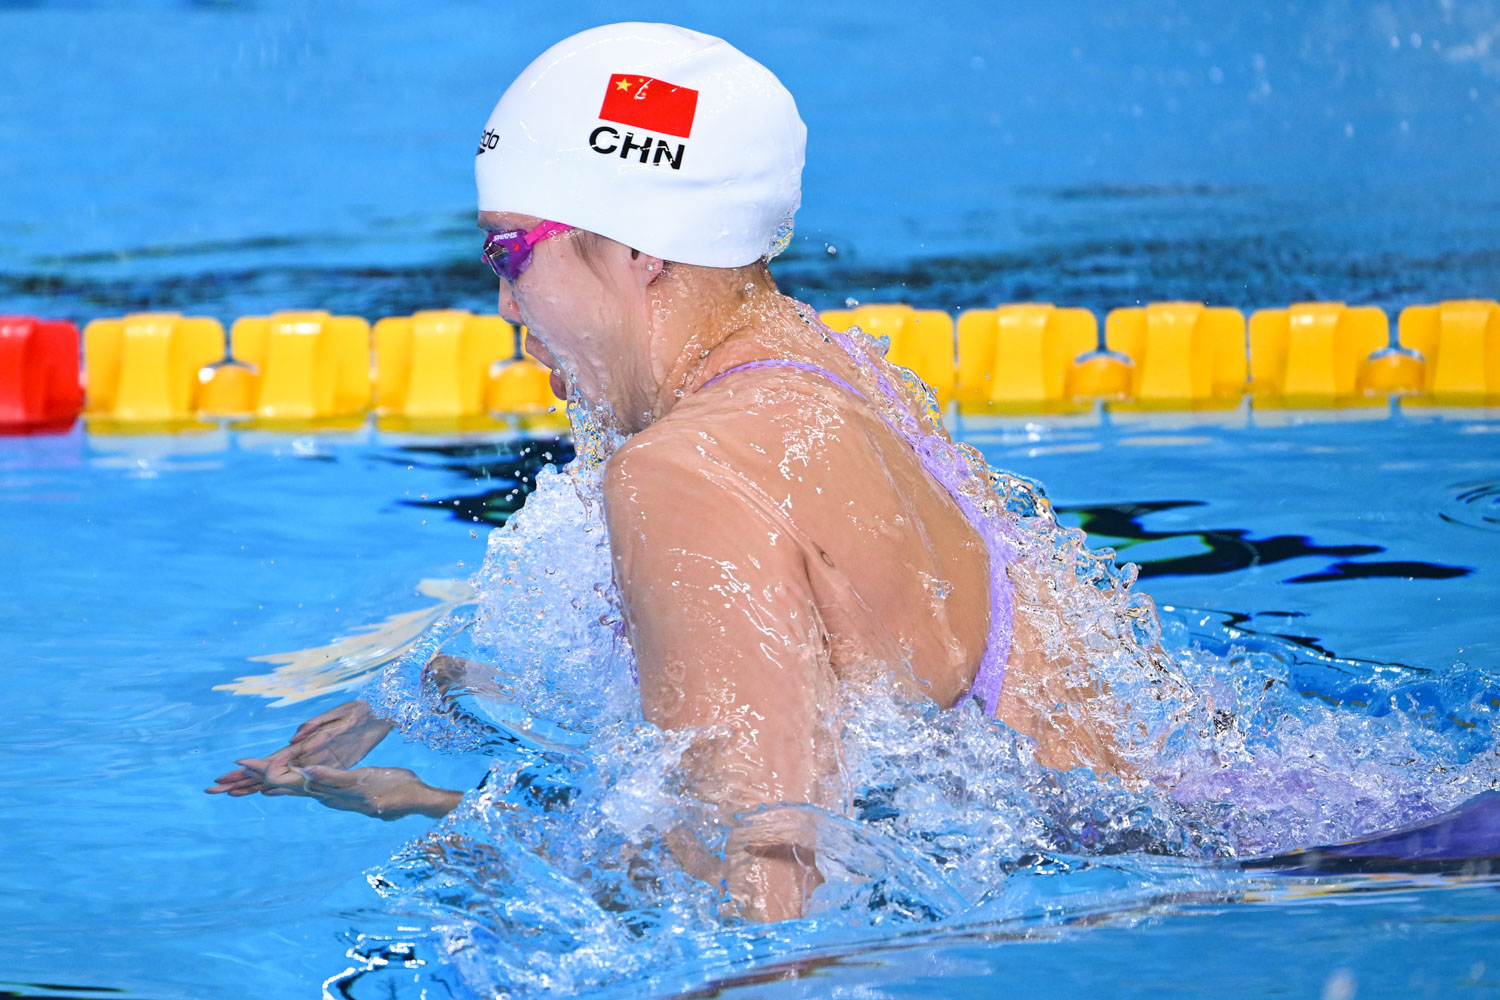 Tang Qianting, World Champion, Sets New Asian Record with 1:04.68 in 100m Breaststroke